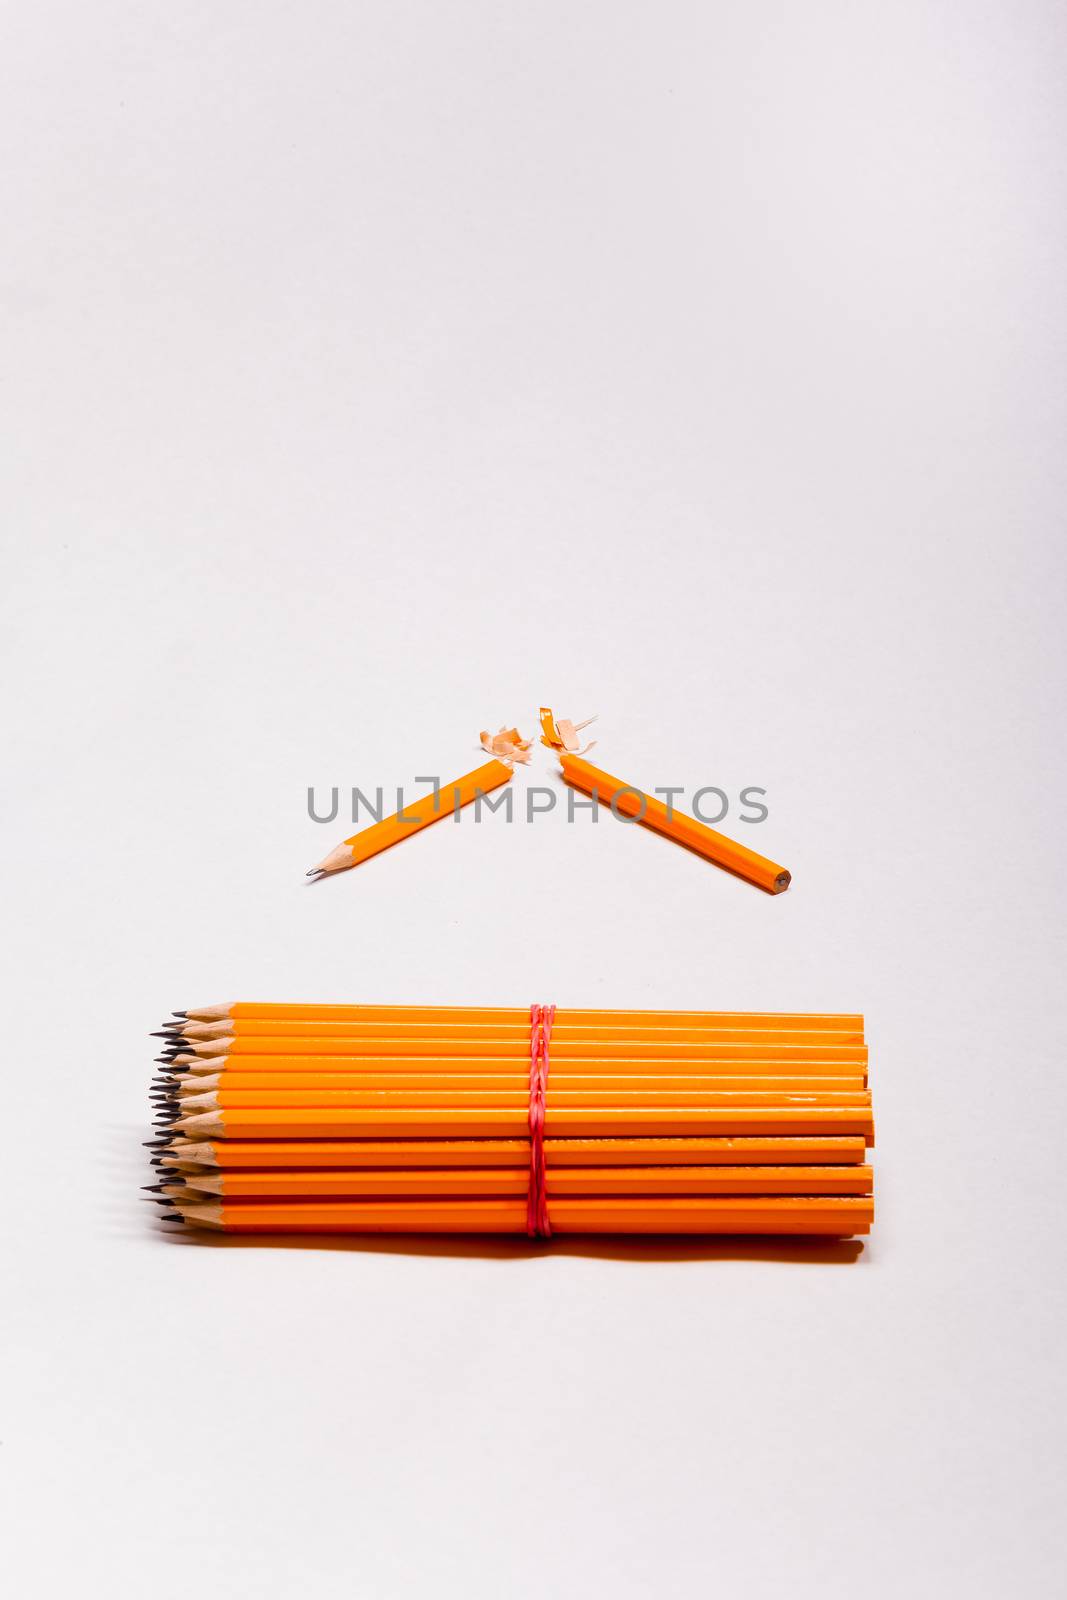 yellow pencils and a broken pencil on gray background